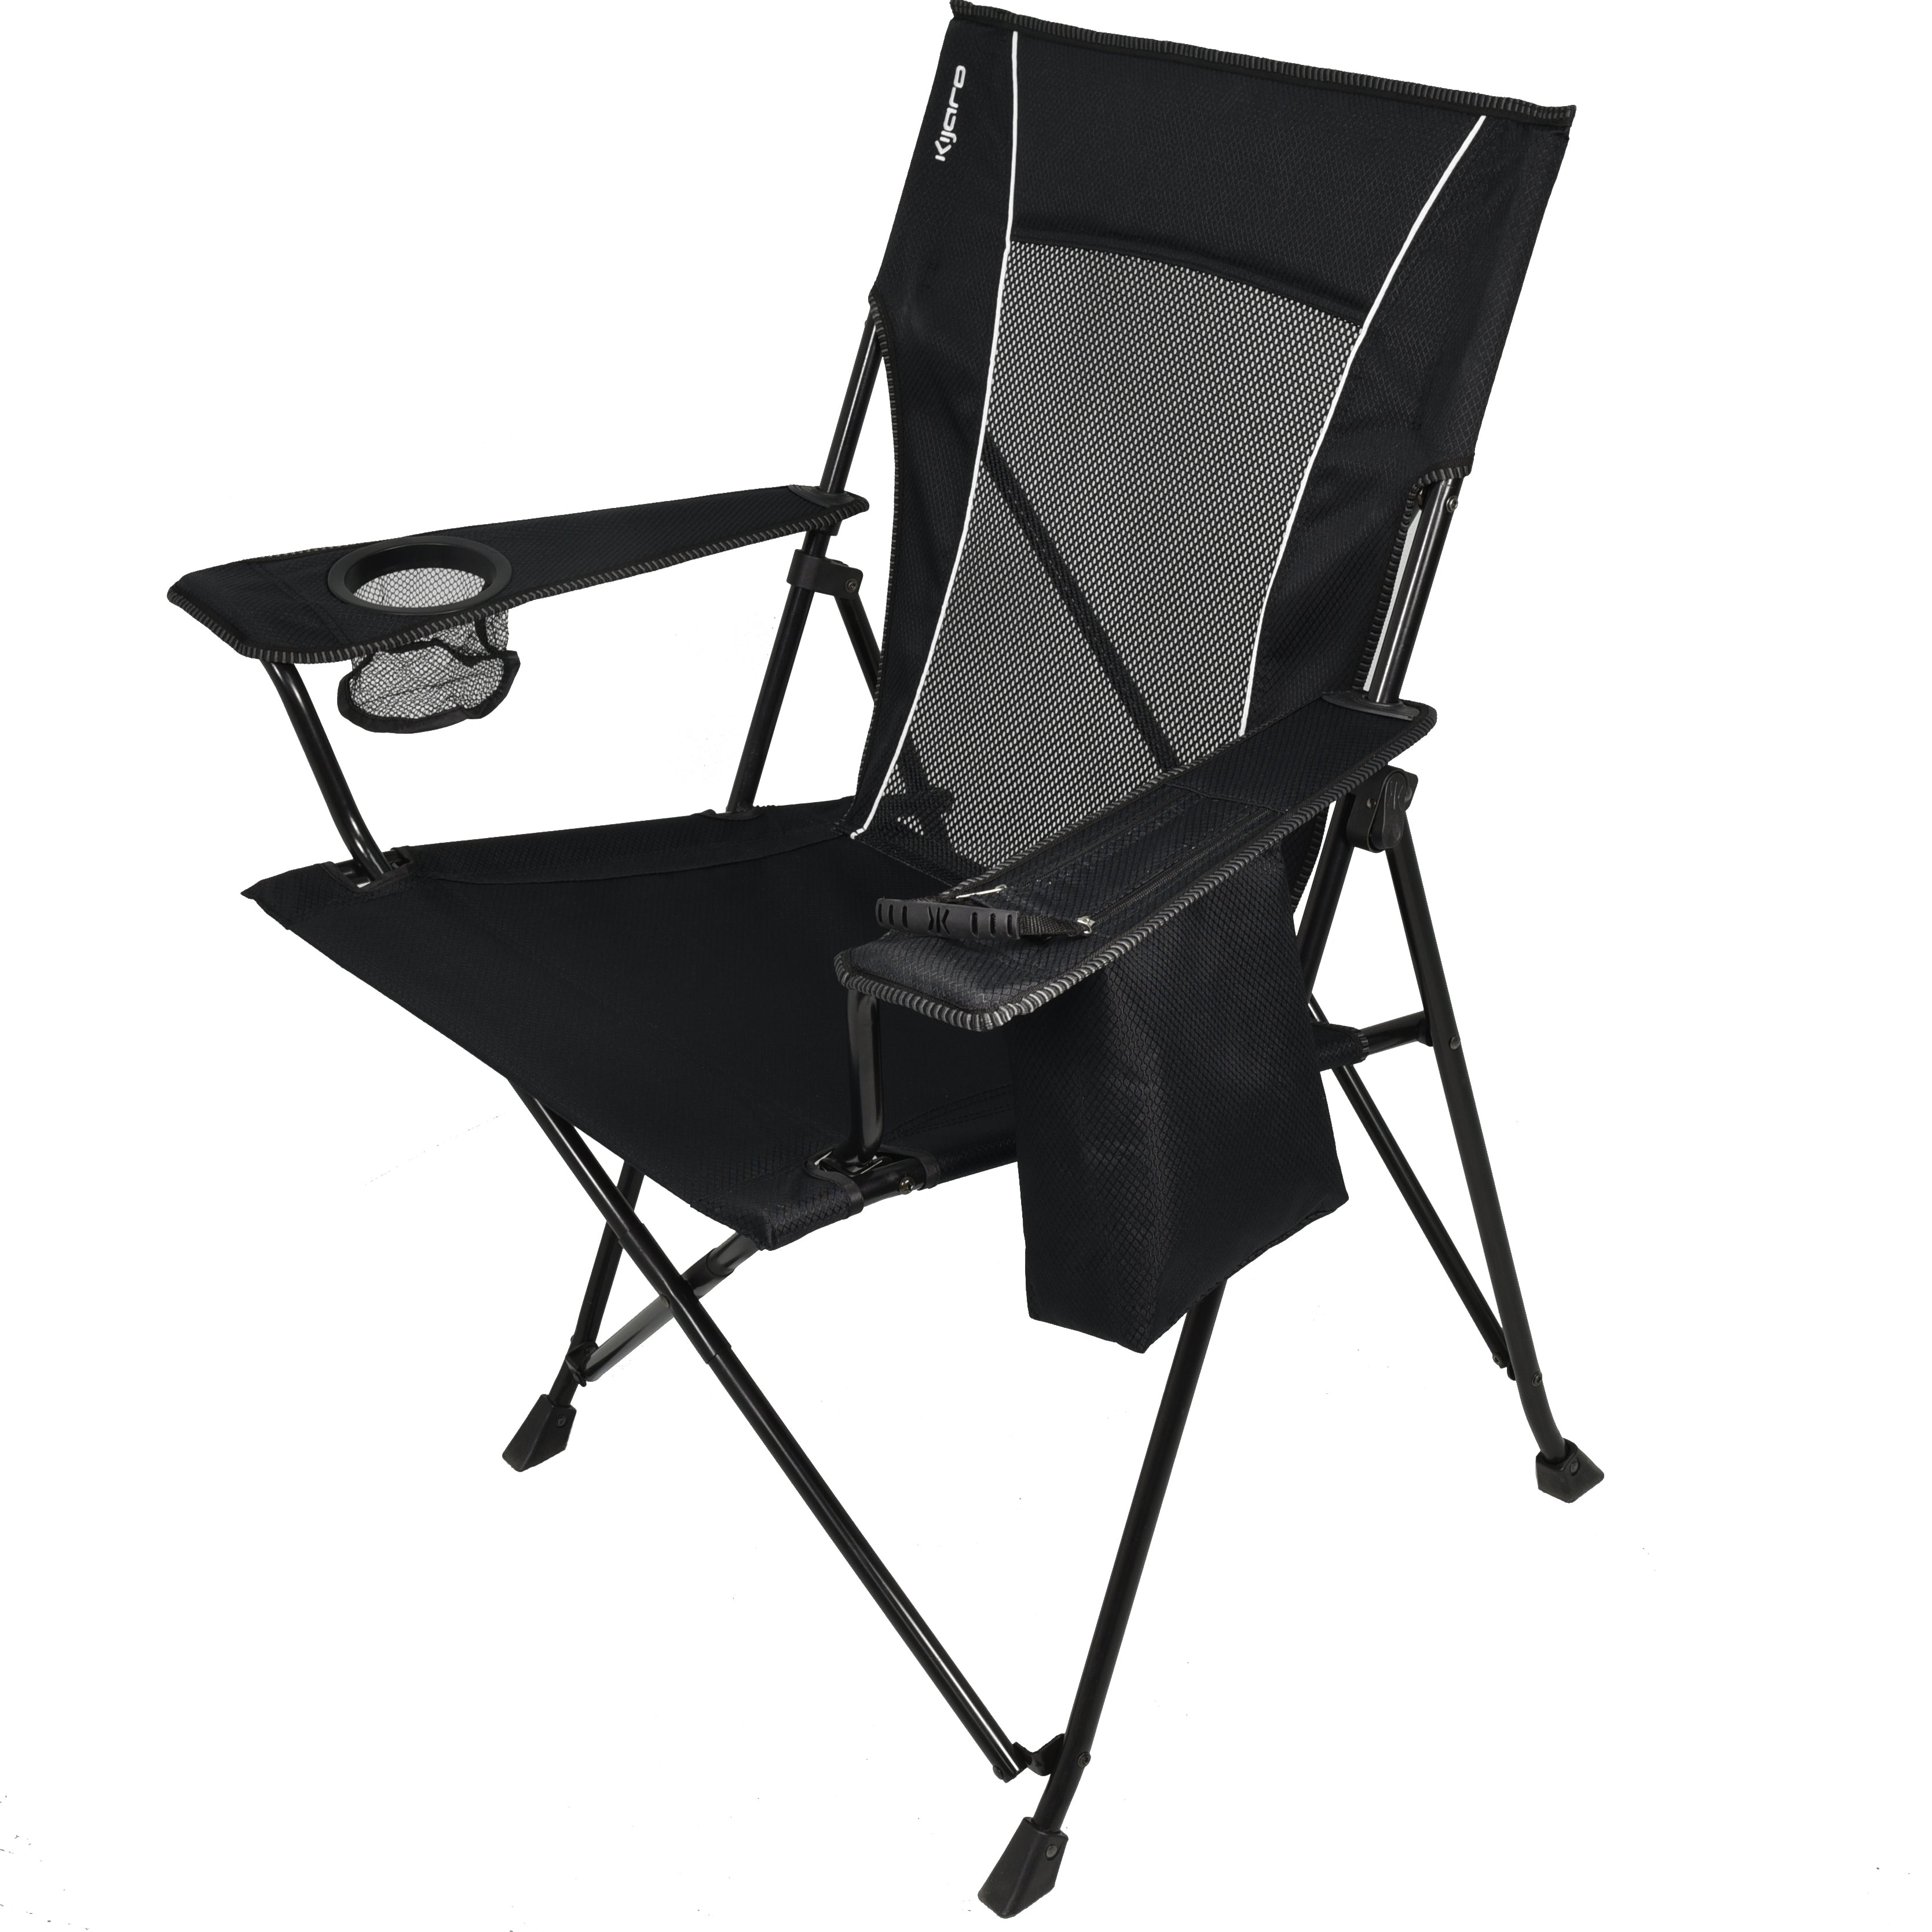 Dual Lock® Chair With Cooler - 300 lb Weight Capacity